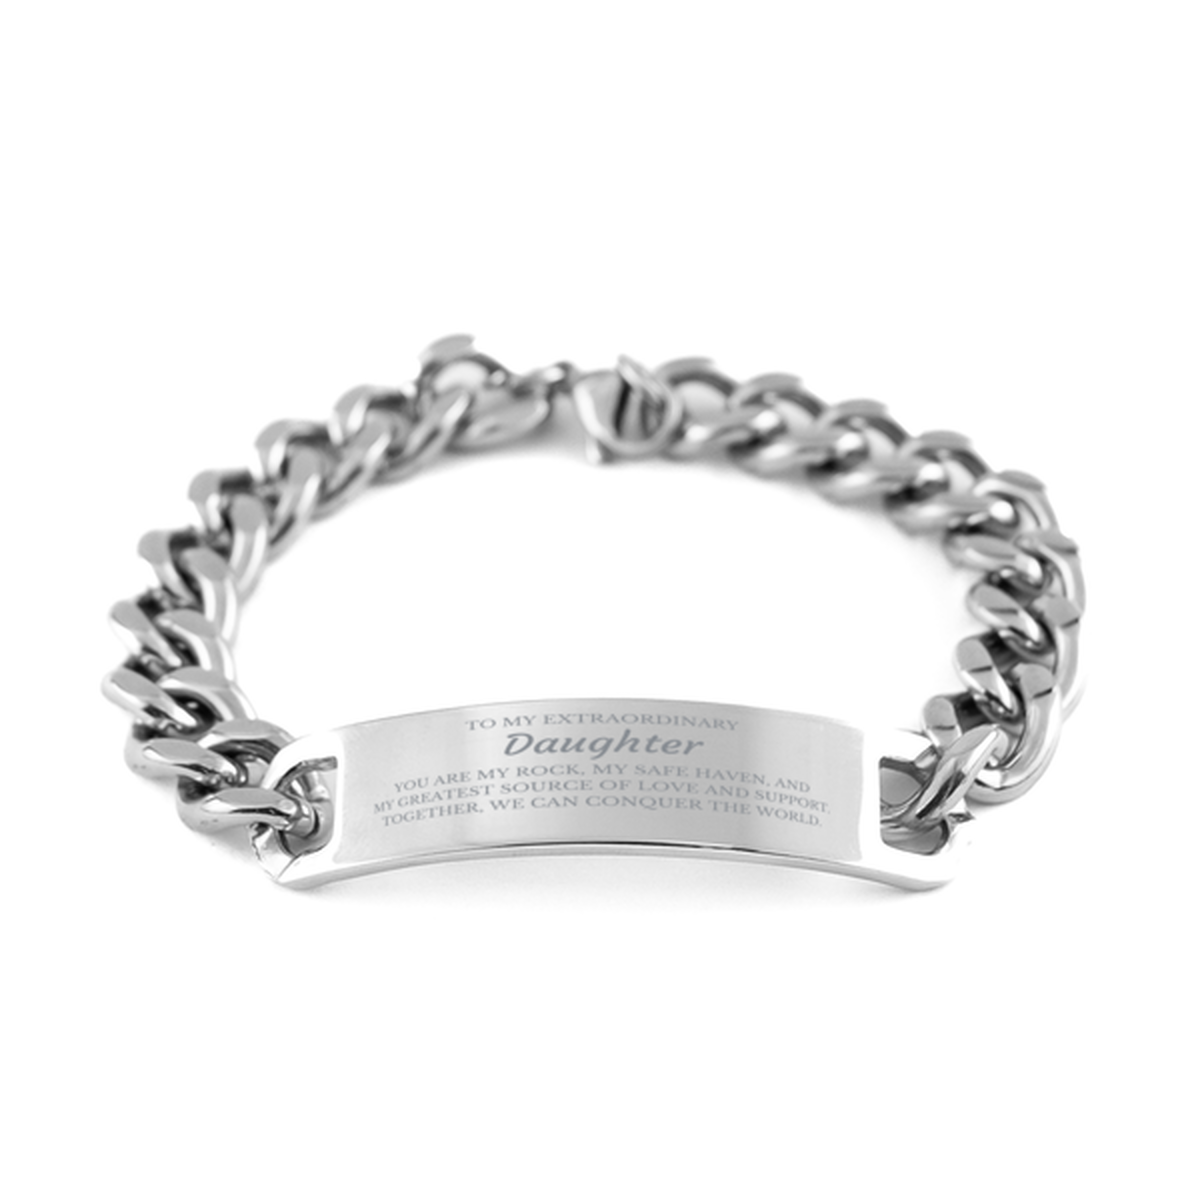 To My Extraordinary Daughter Gifts, Together, we can conquer the world, Birthday Cuban Chain Stainless Steel Bracelet For Daughter, Christmas Gifts For Daughter